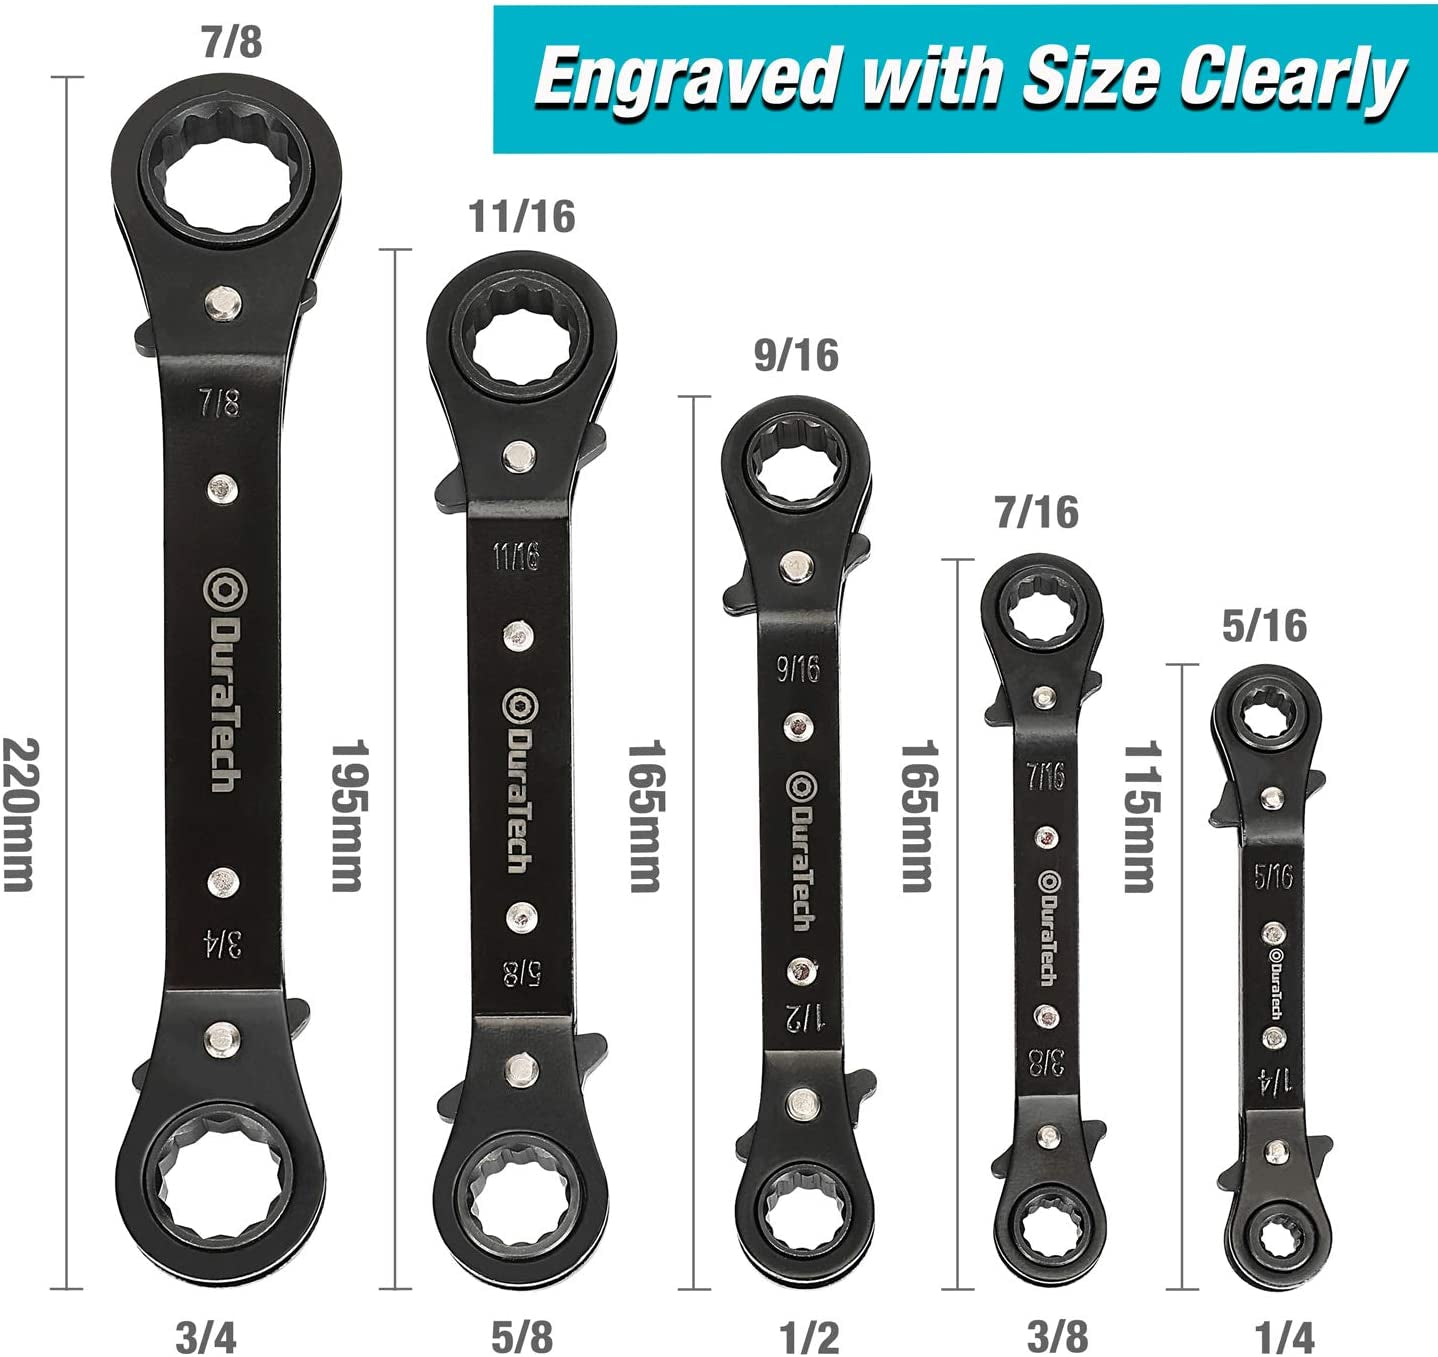 5 Pc Double Offset Box End Reversible Ratcheting Wrench Set, SAE, Heavy-Duty, Matte Chrome Plated, Ratchet Spanner Crooked for Narrow Spaces (1/4 - 7/8 Inch)